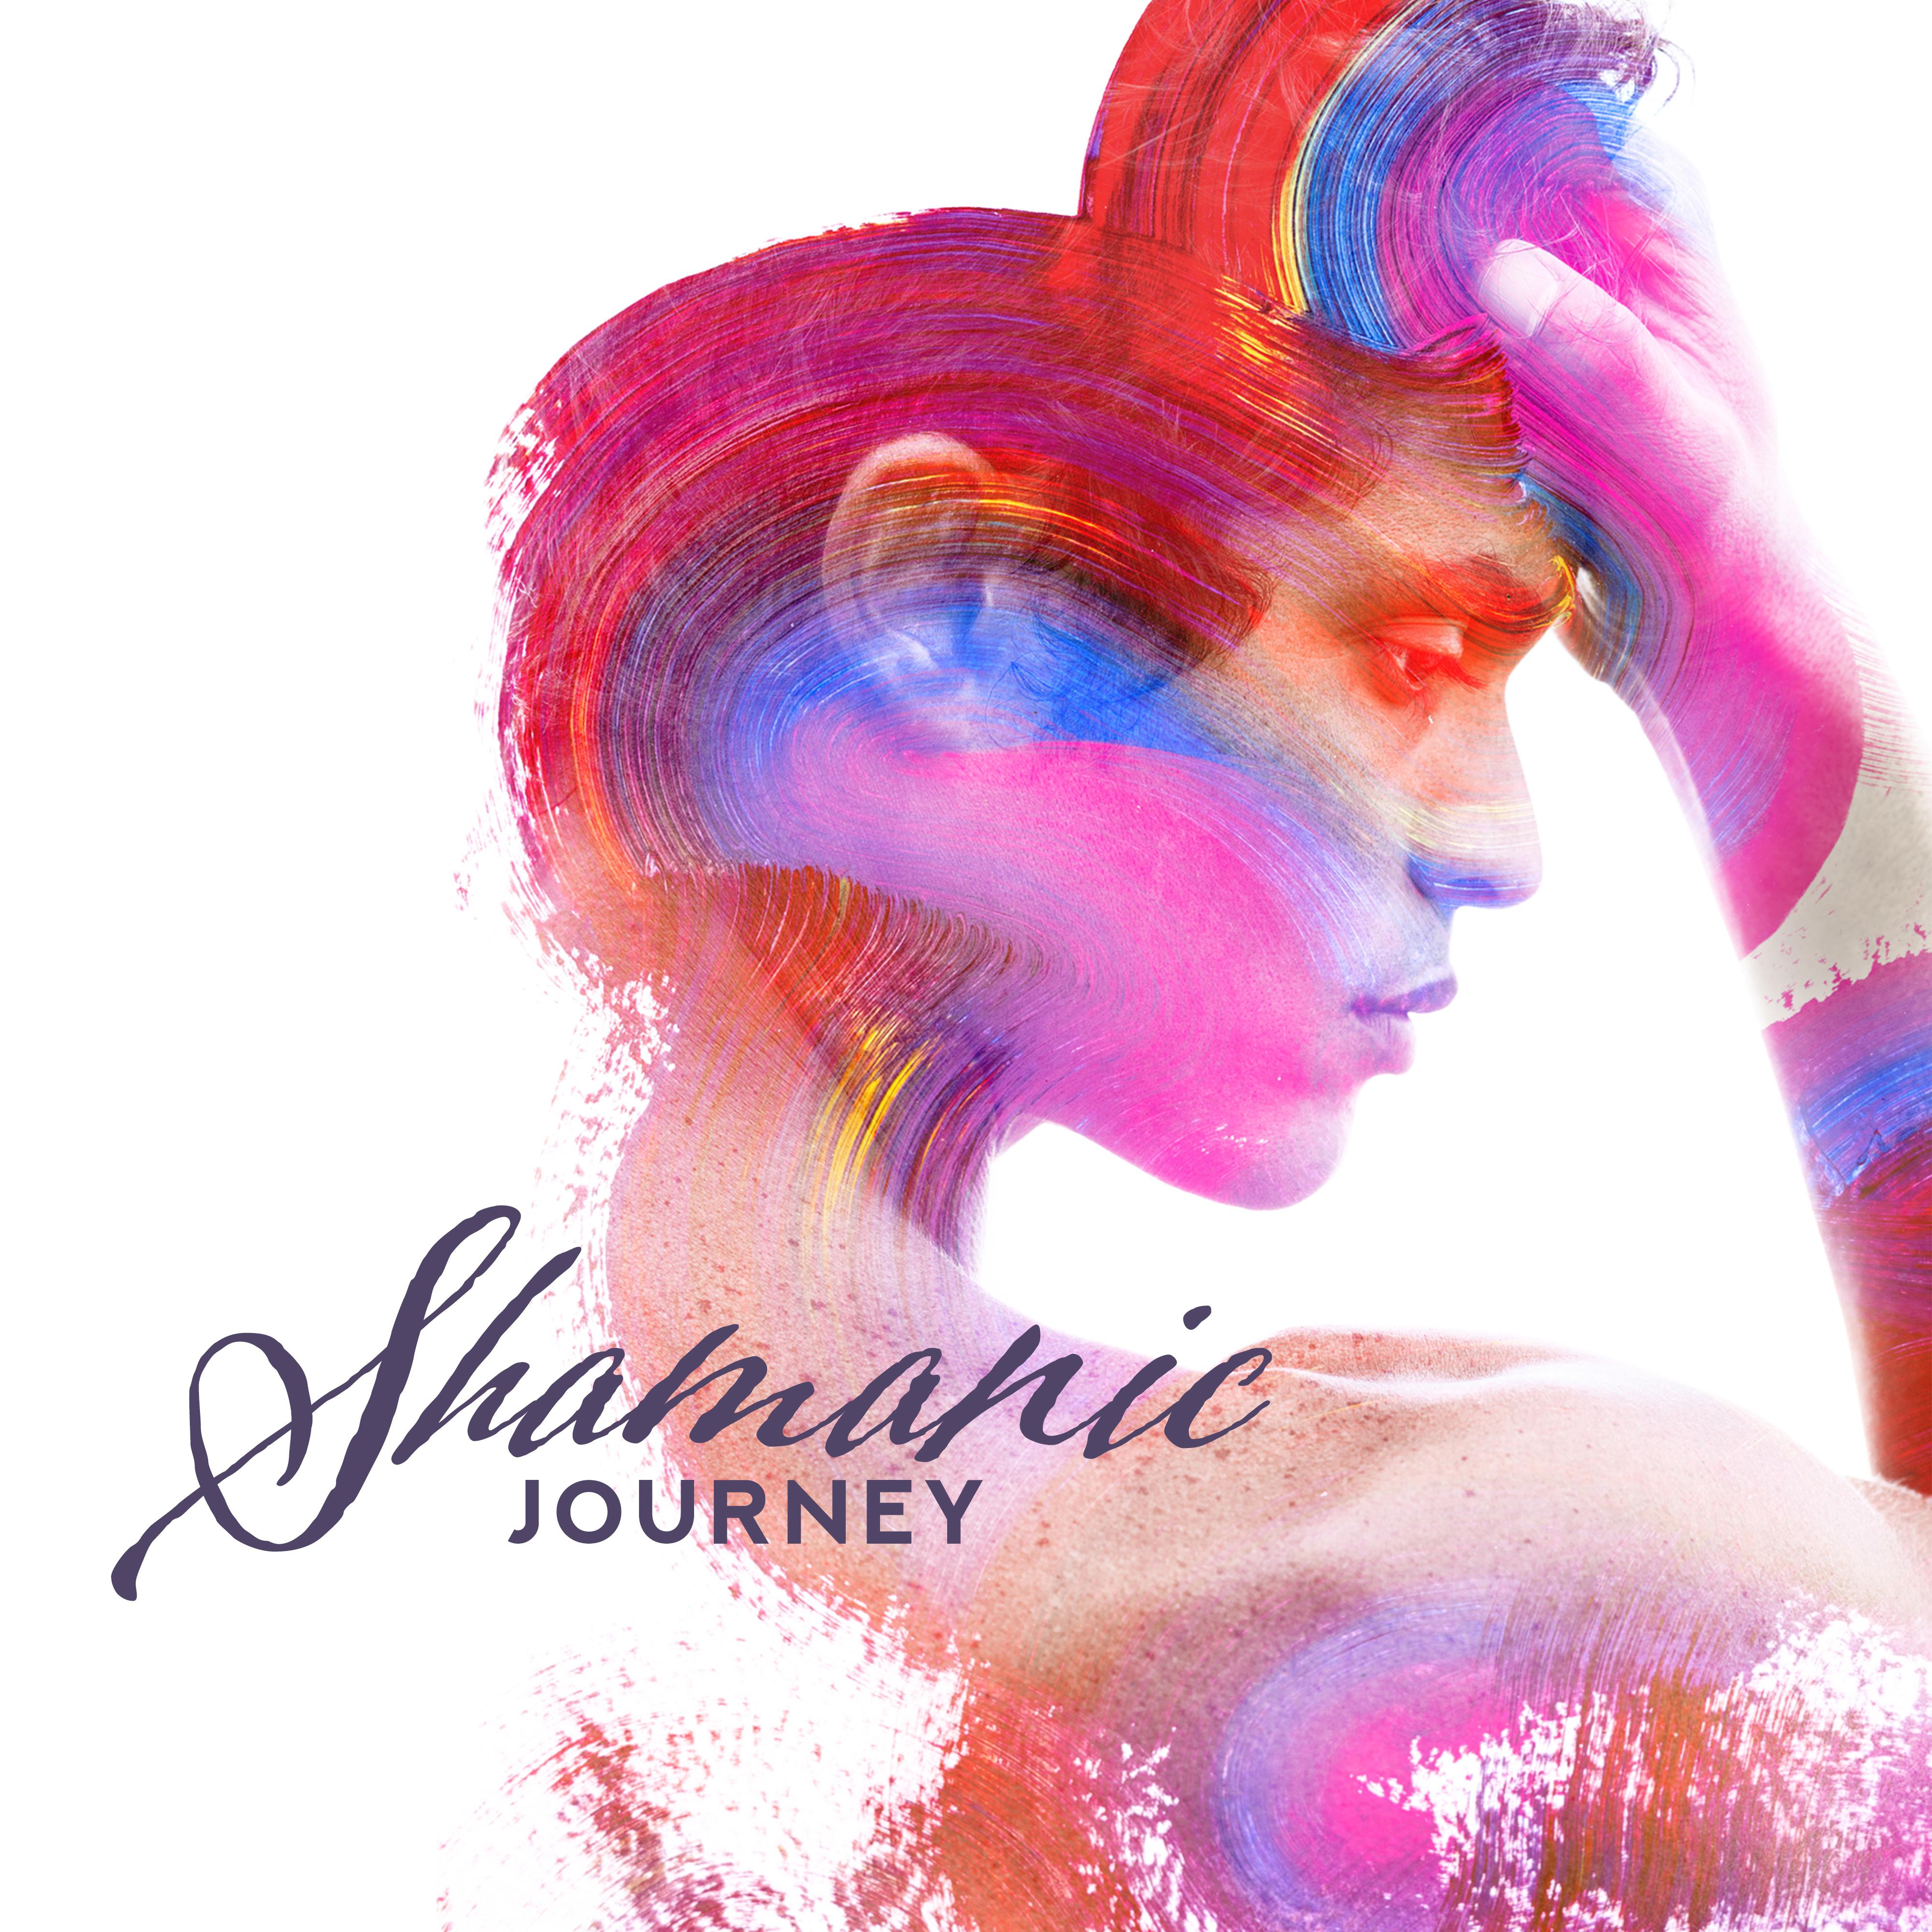 Shamanic Journey: Relaxing Sounds for Deep Meditation, Yoga, Relaxation, Native American Flute for Reduce Stress, Inner Harmony, Shamanic Zone, Healing Music